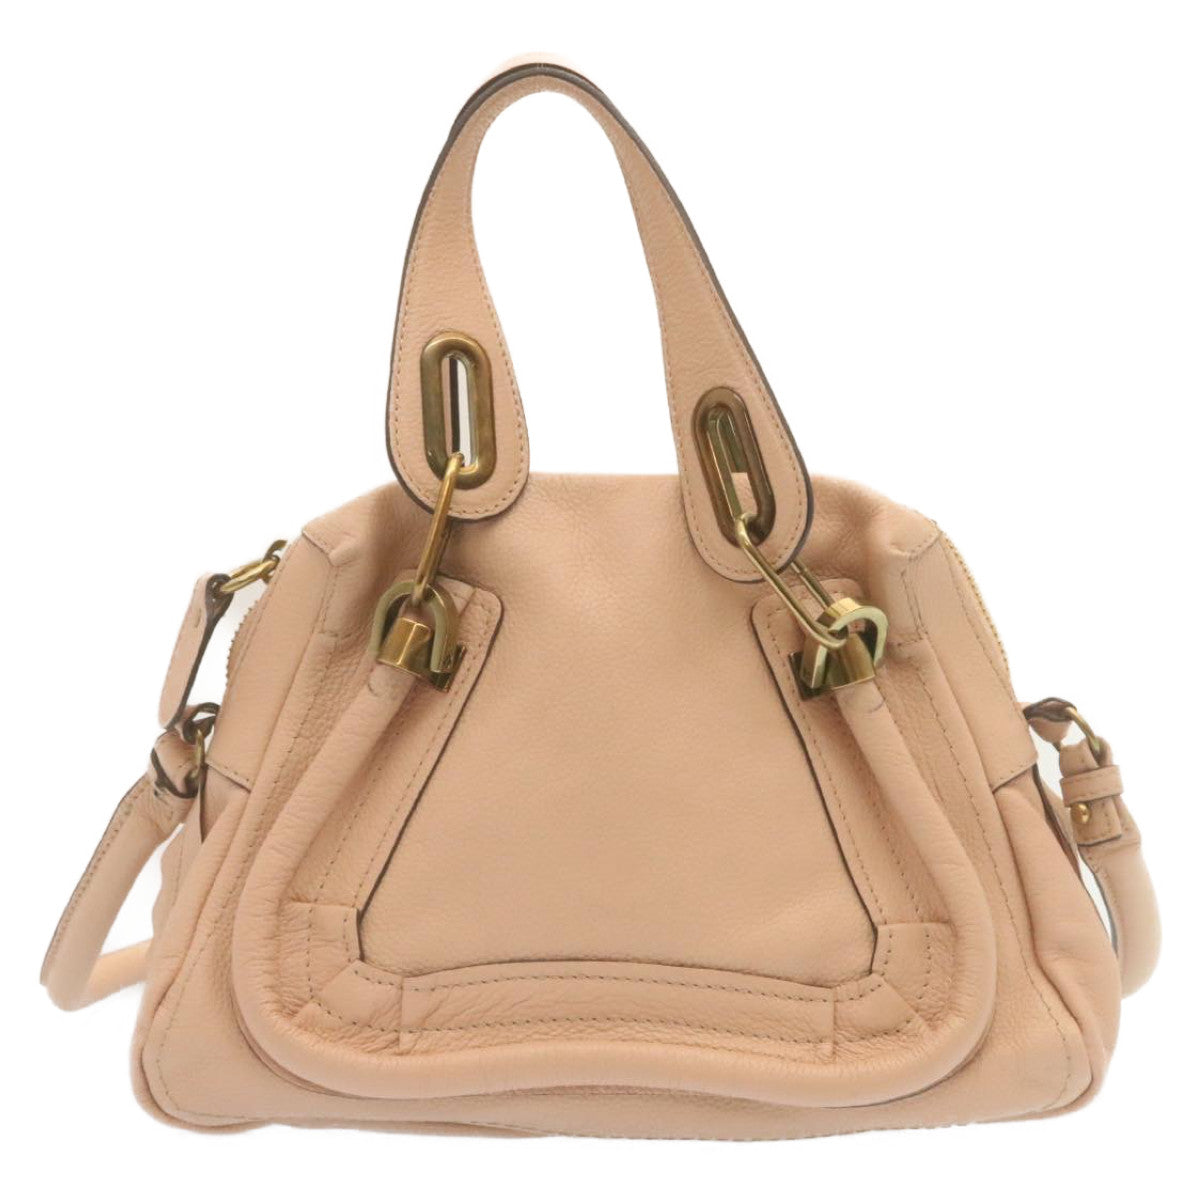 Chloe Hand Bag Leather 2way Pink Auth am2241g - 0